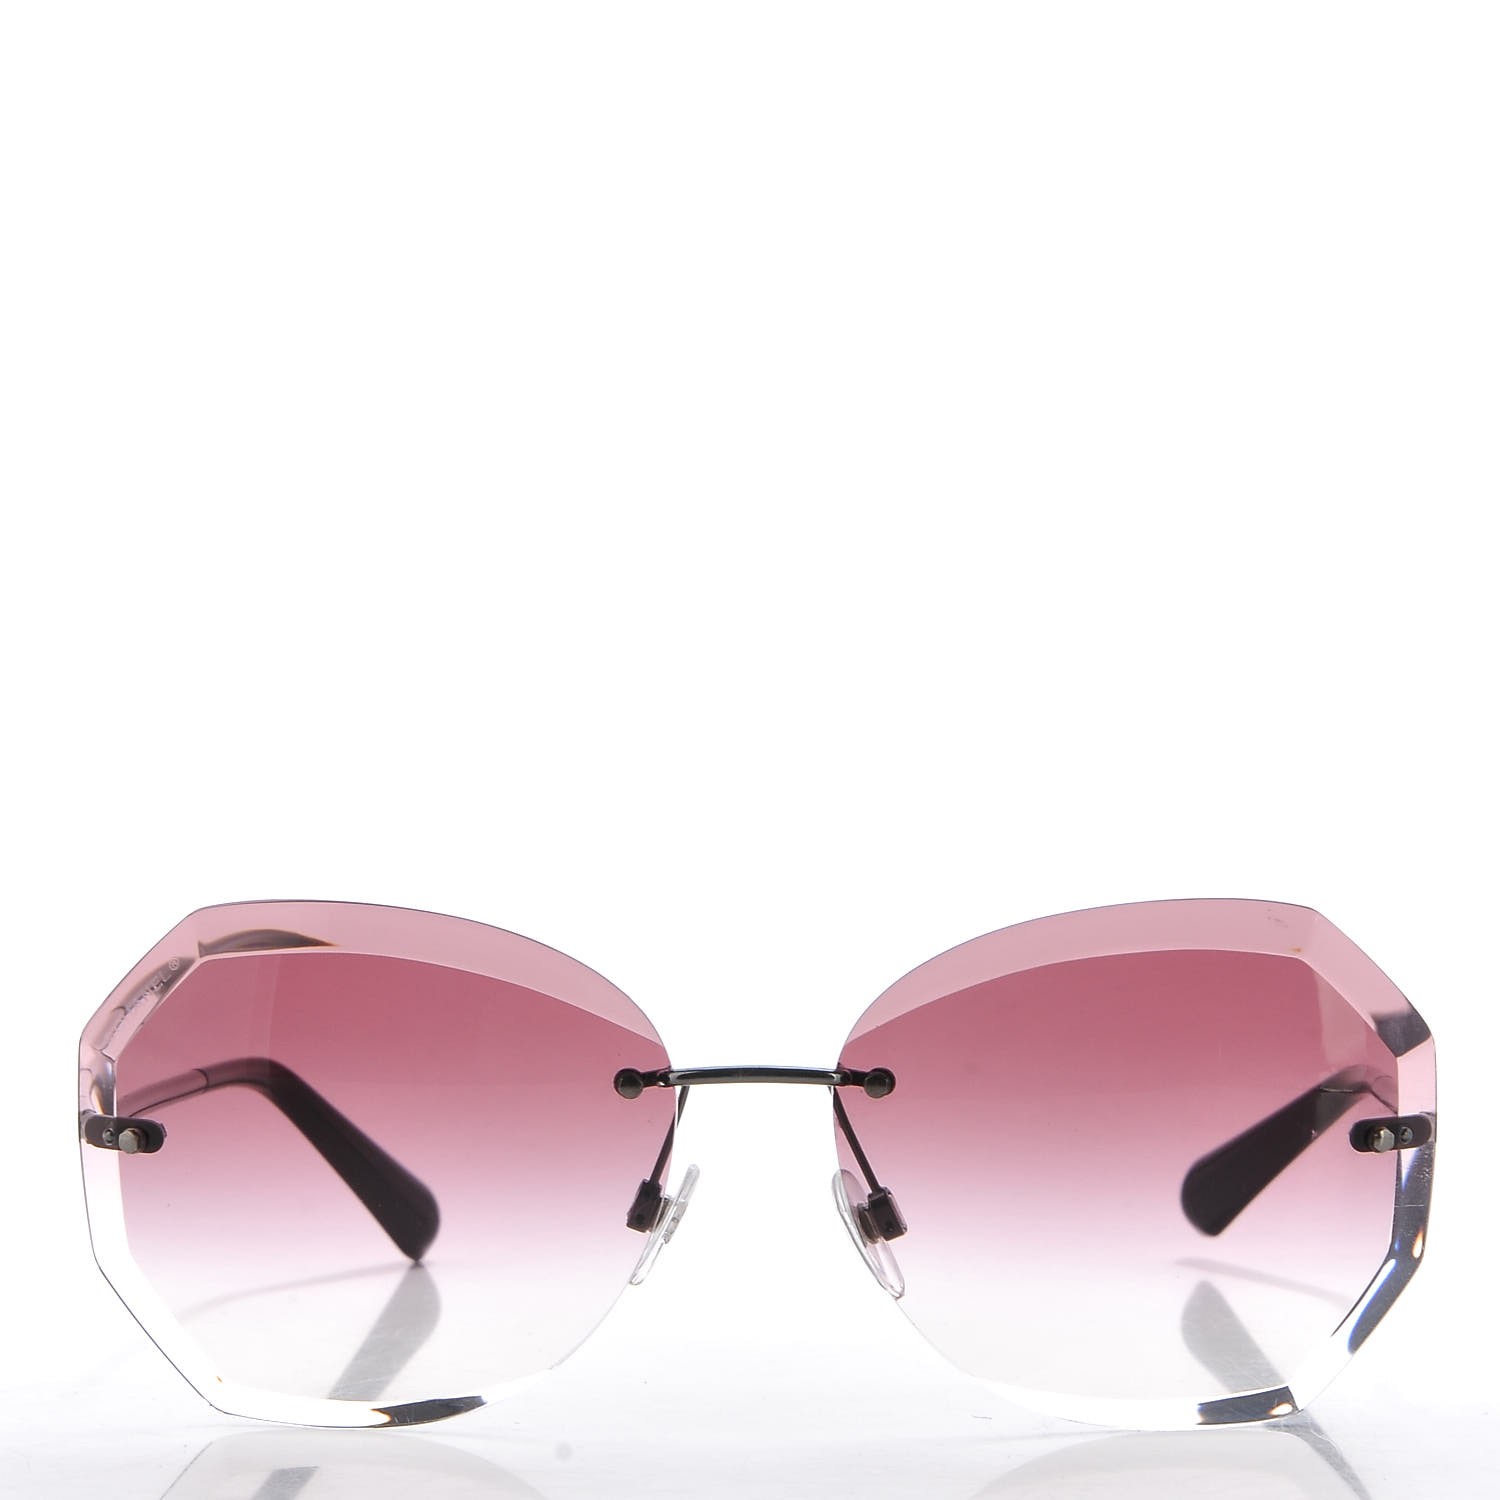 CHANEL Round Spring Sunglasses 4220 Silver Pink 289585 | FASHIONPHILE